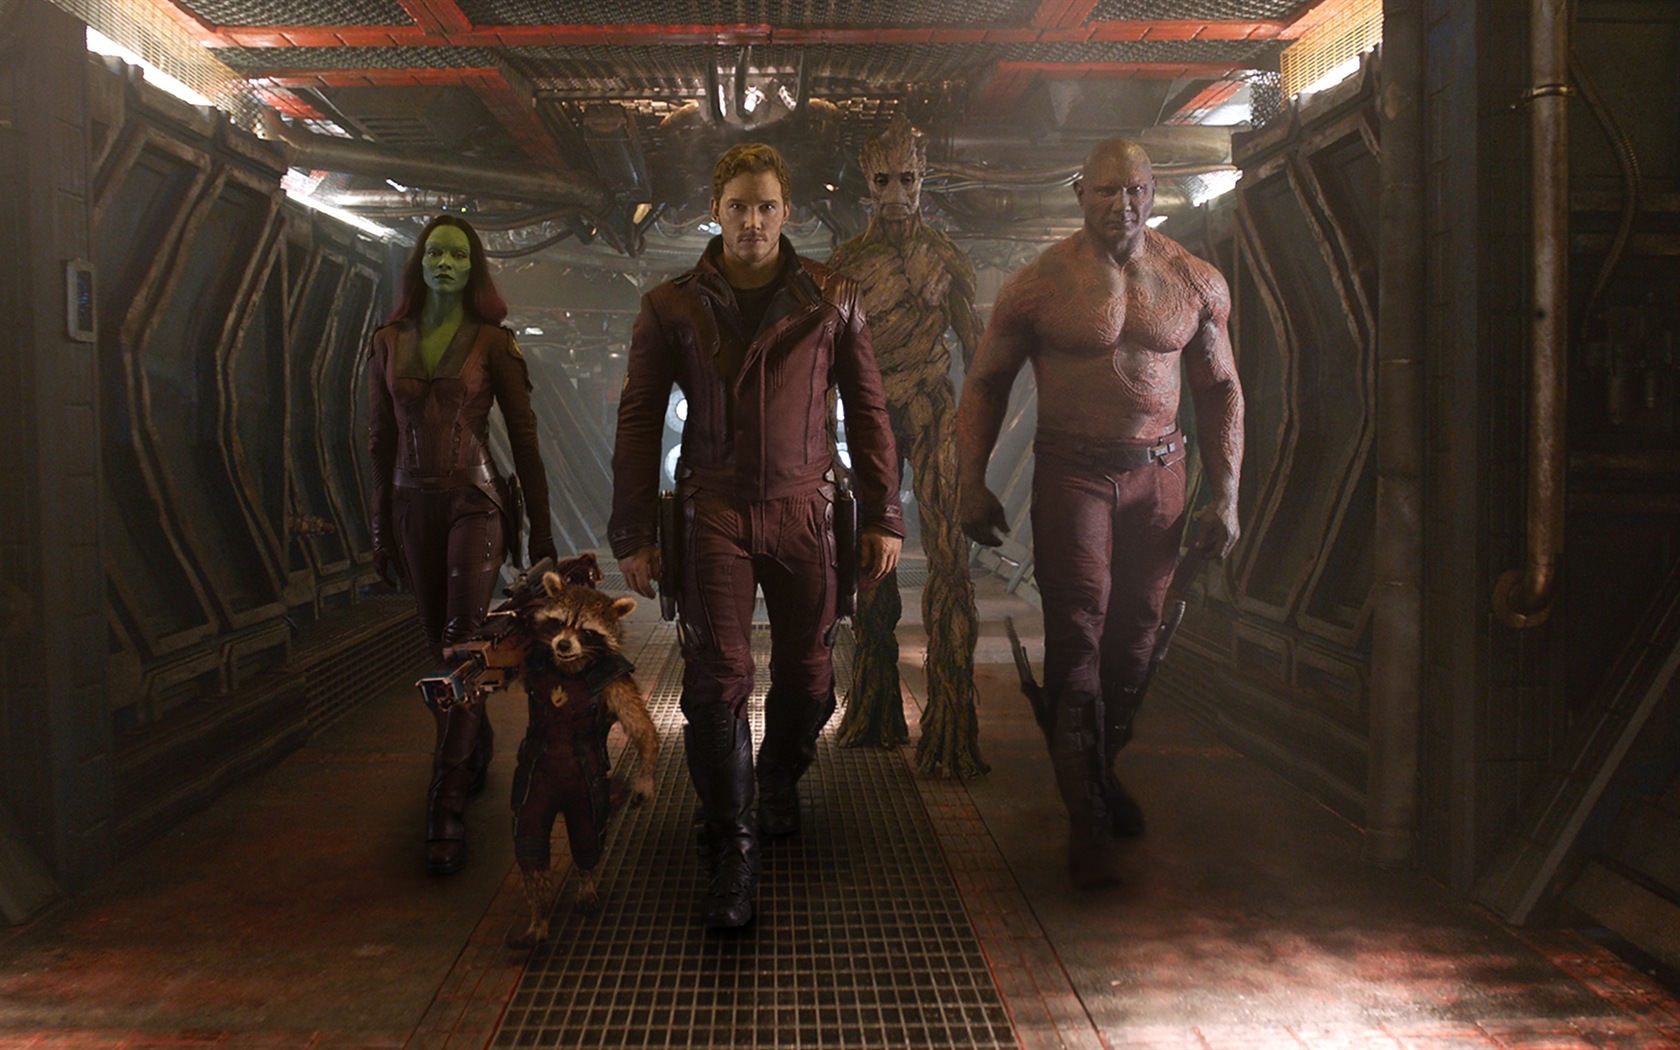 Guardians of the Galaxy 2014 HD movie wallpapers #2 - 1680x1050